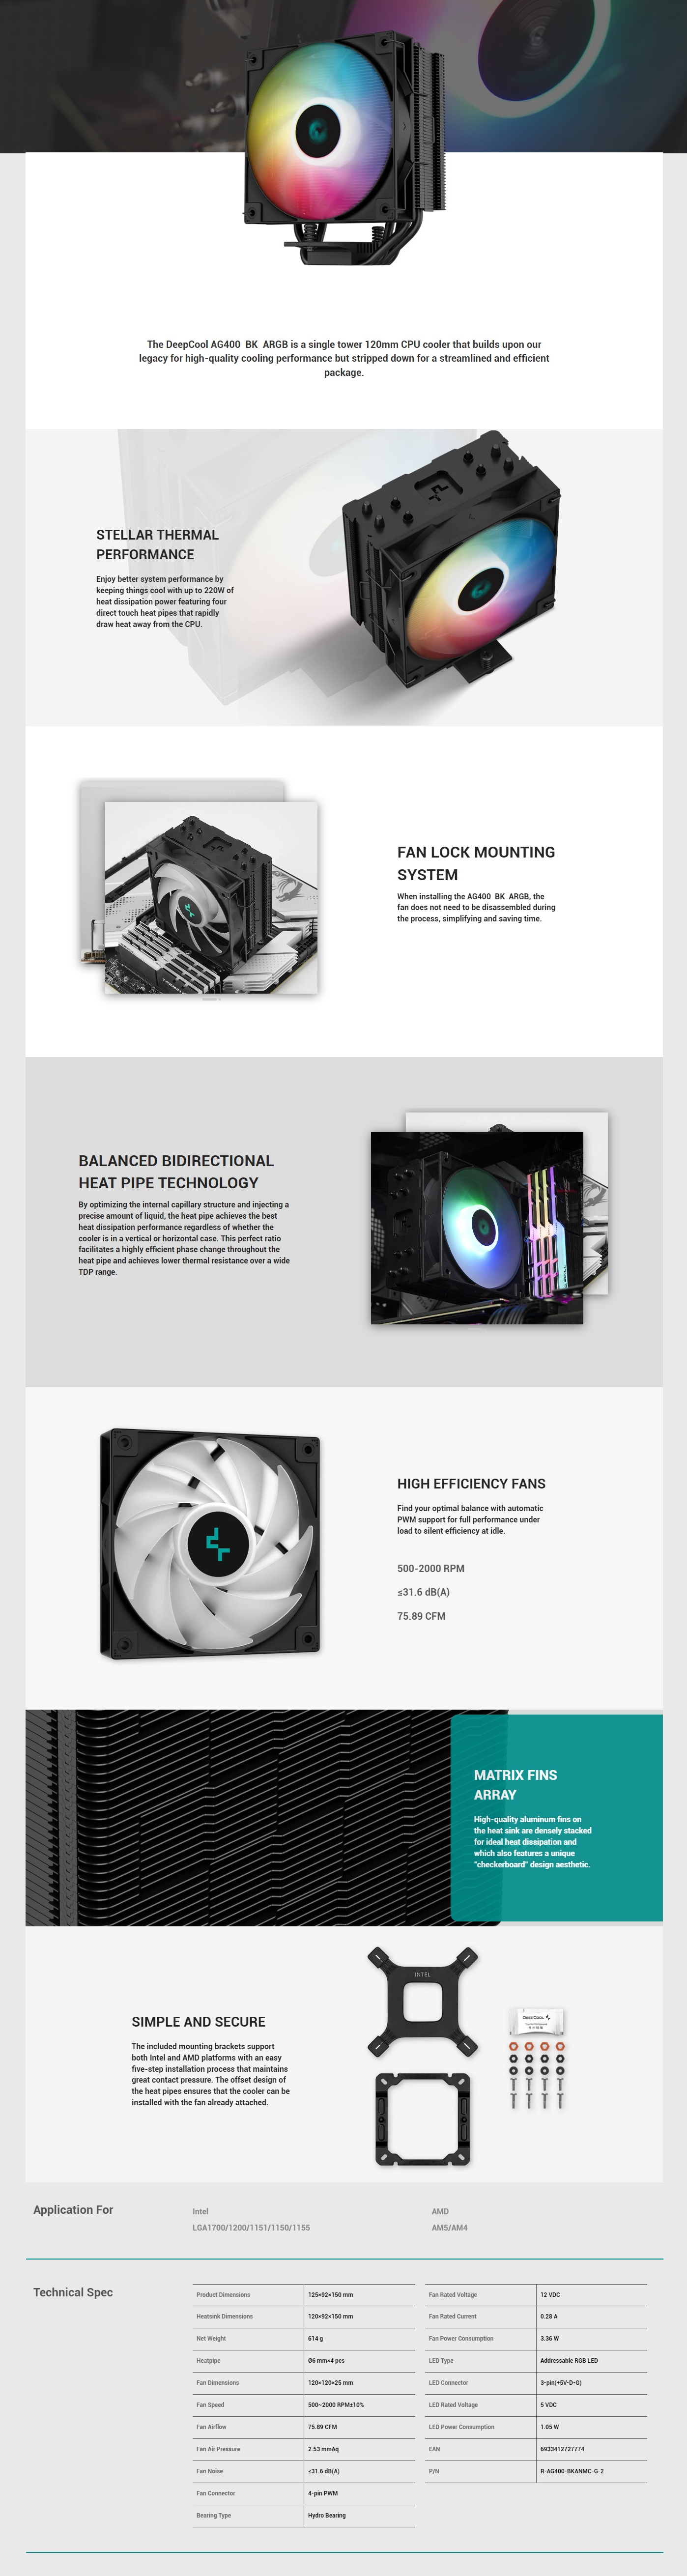 A large marketing image providing additional information about the product DeepCool AG400 Black ARGB CPU Cooler - Additional alt info not provided